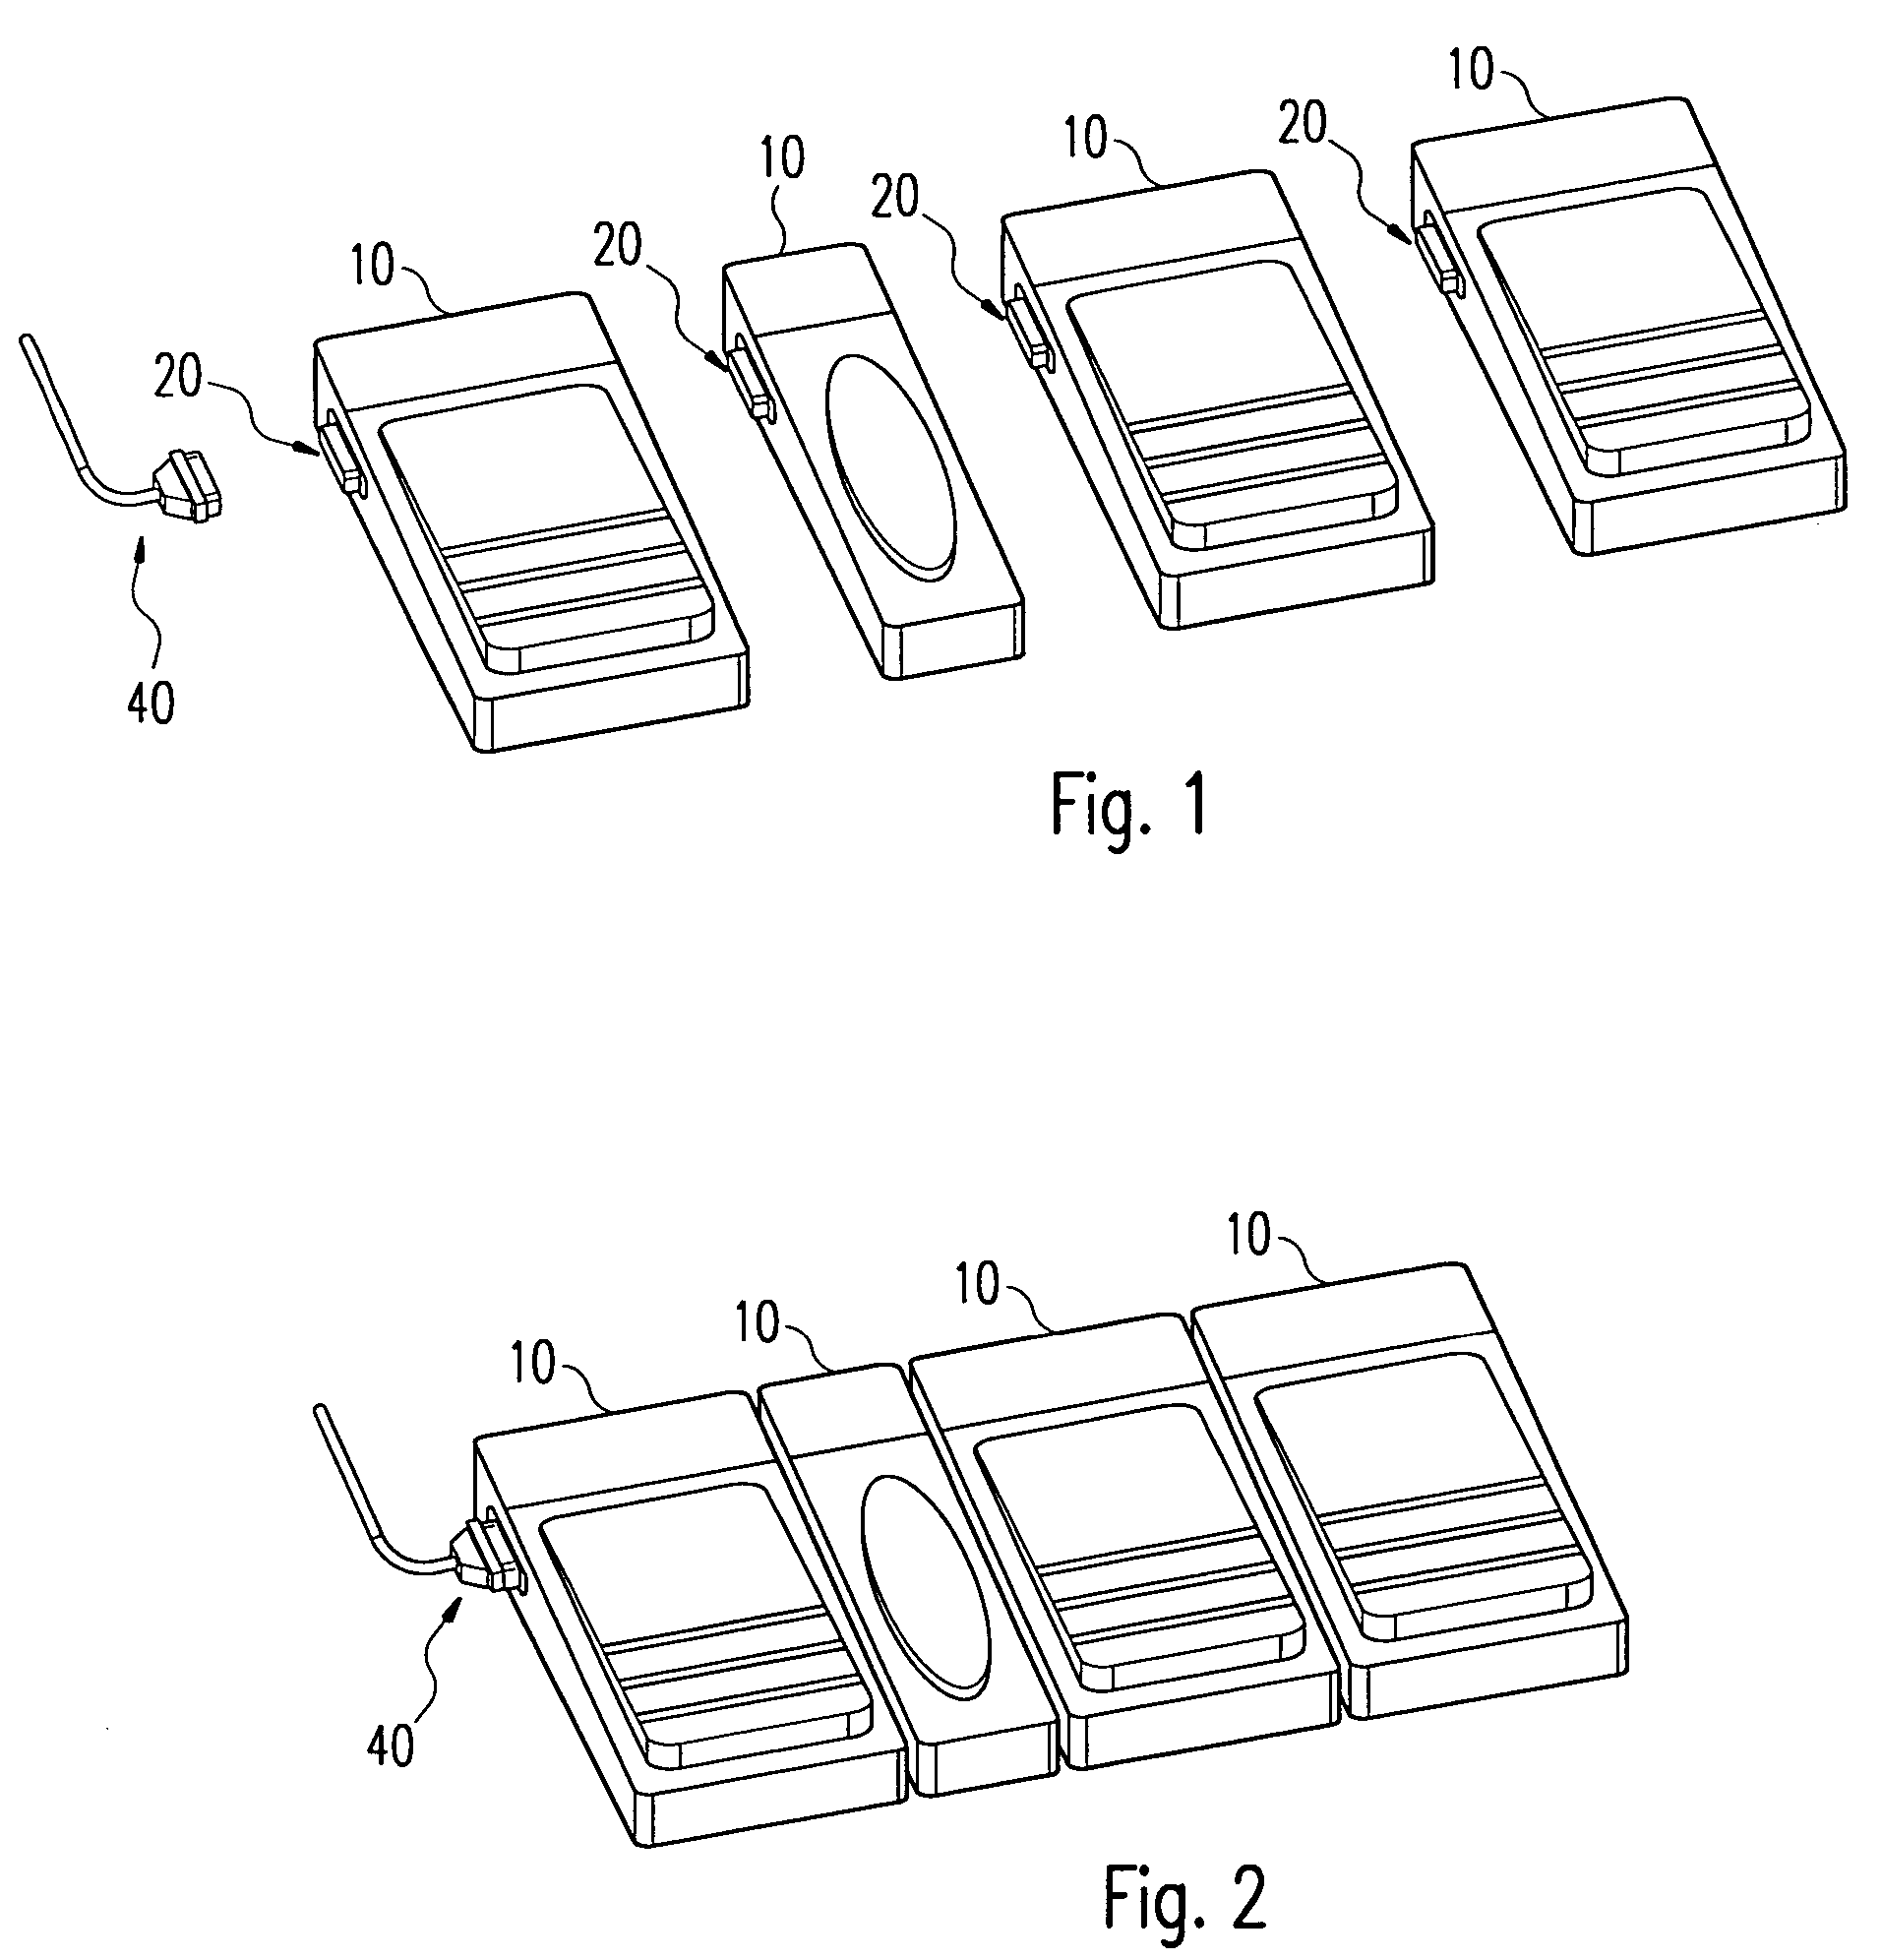 Control device for controlling electromedical appliances